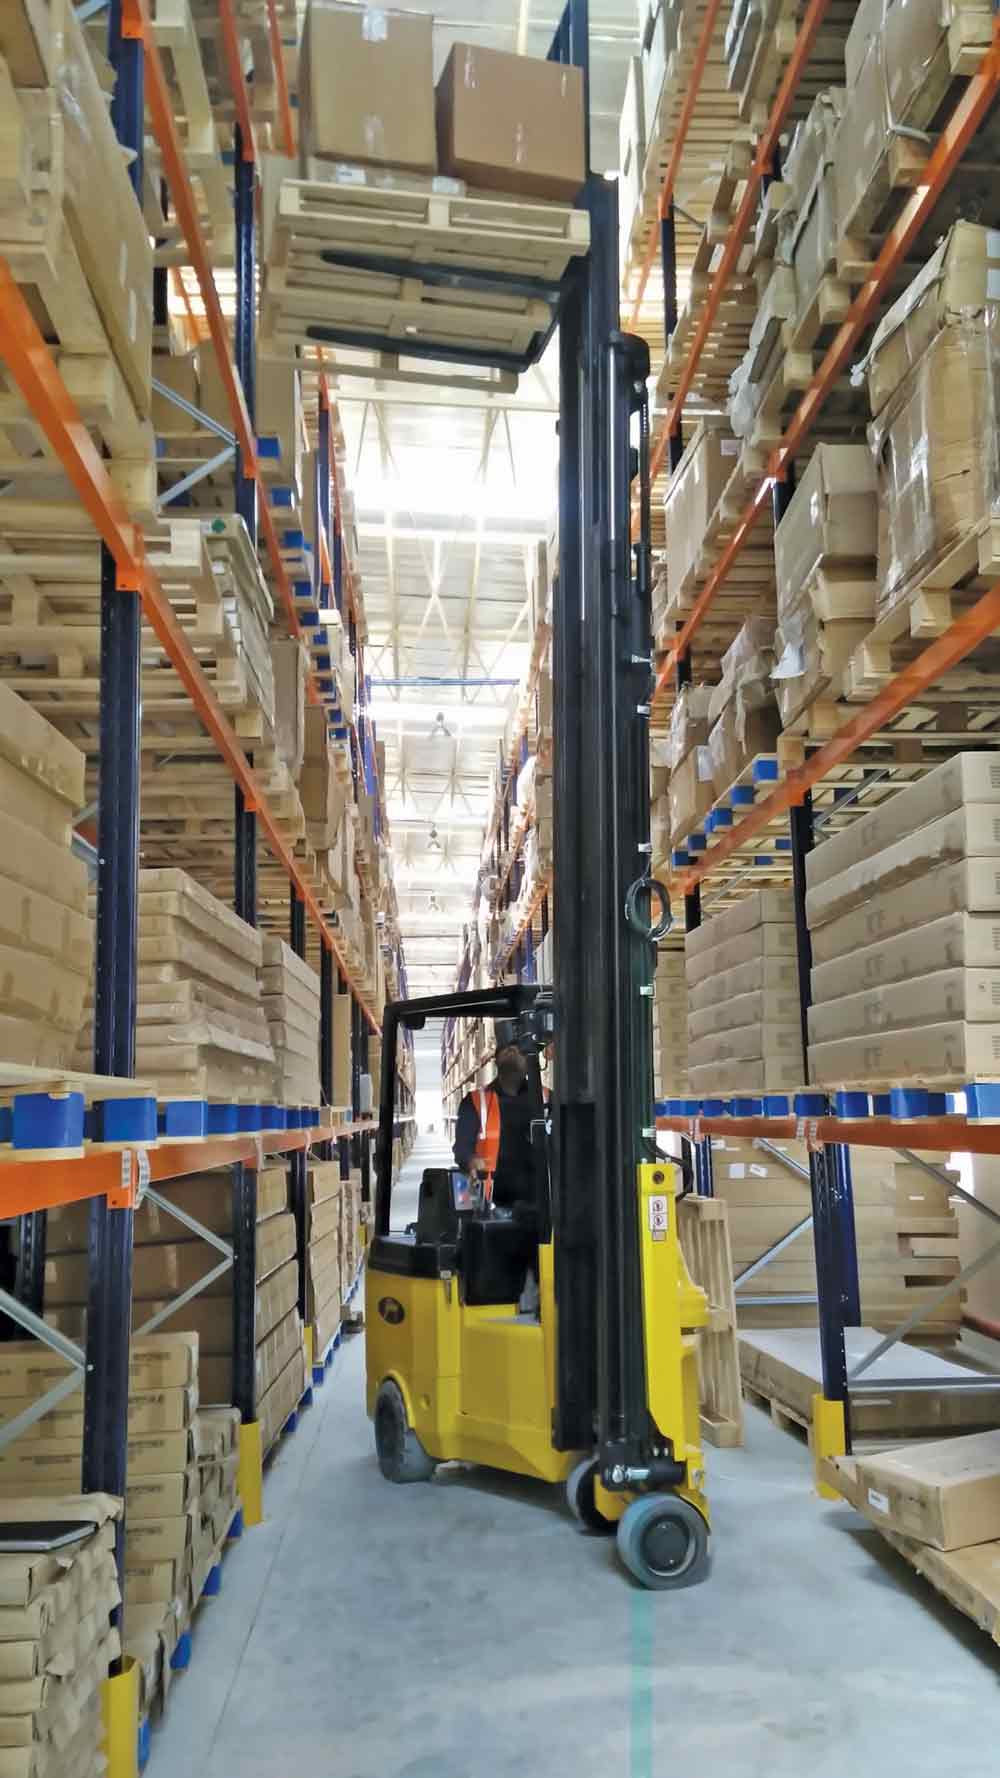 Articulated-Truck-working-in-narrow-working-aisles